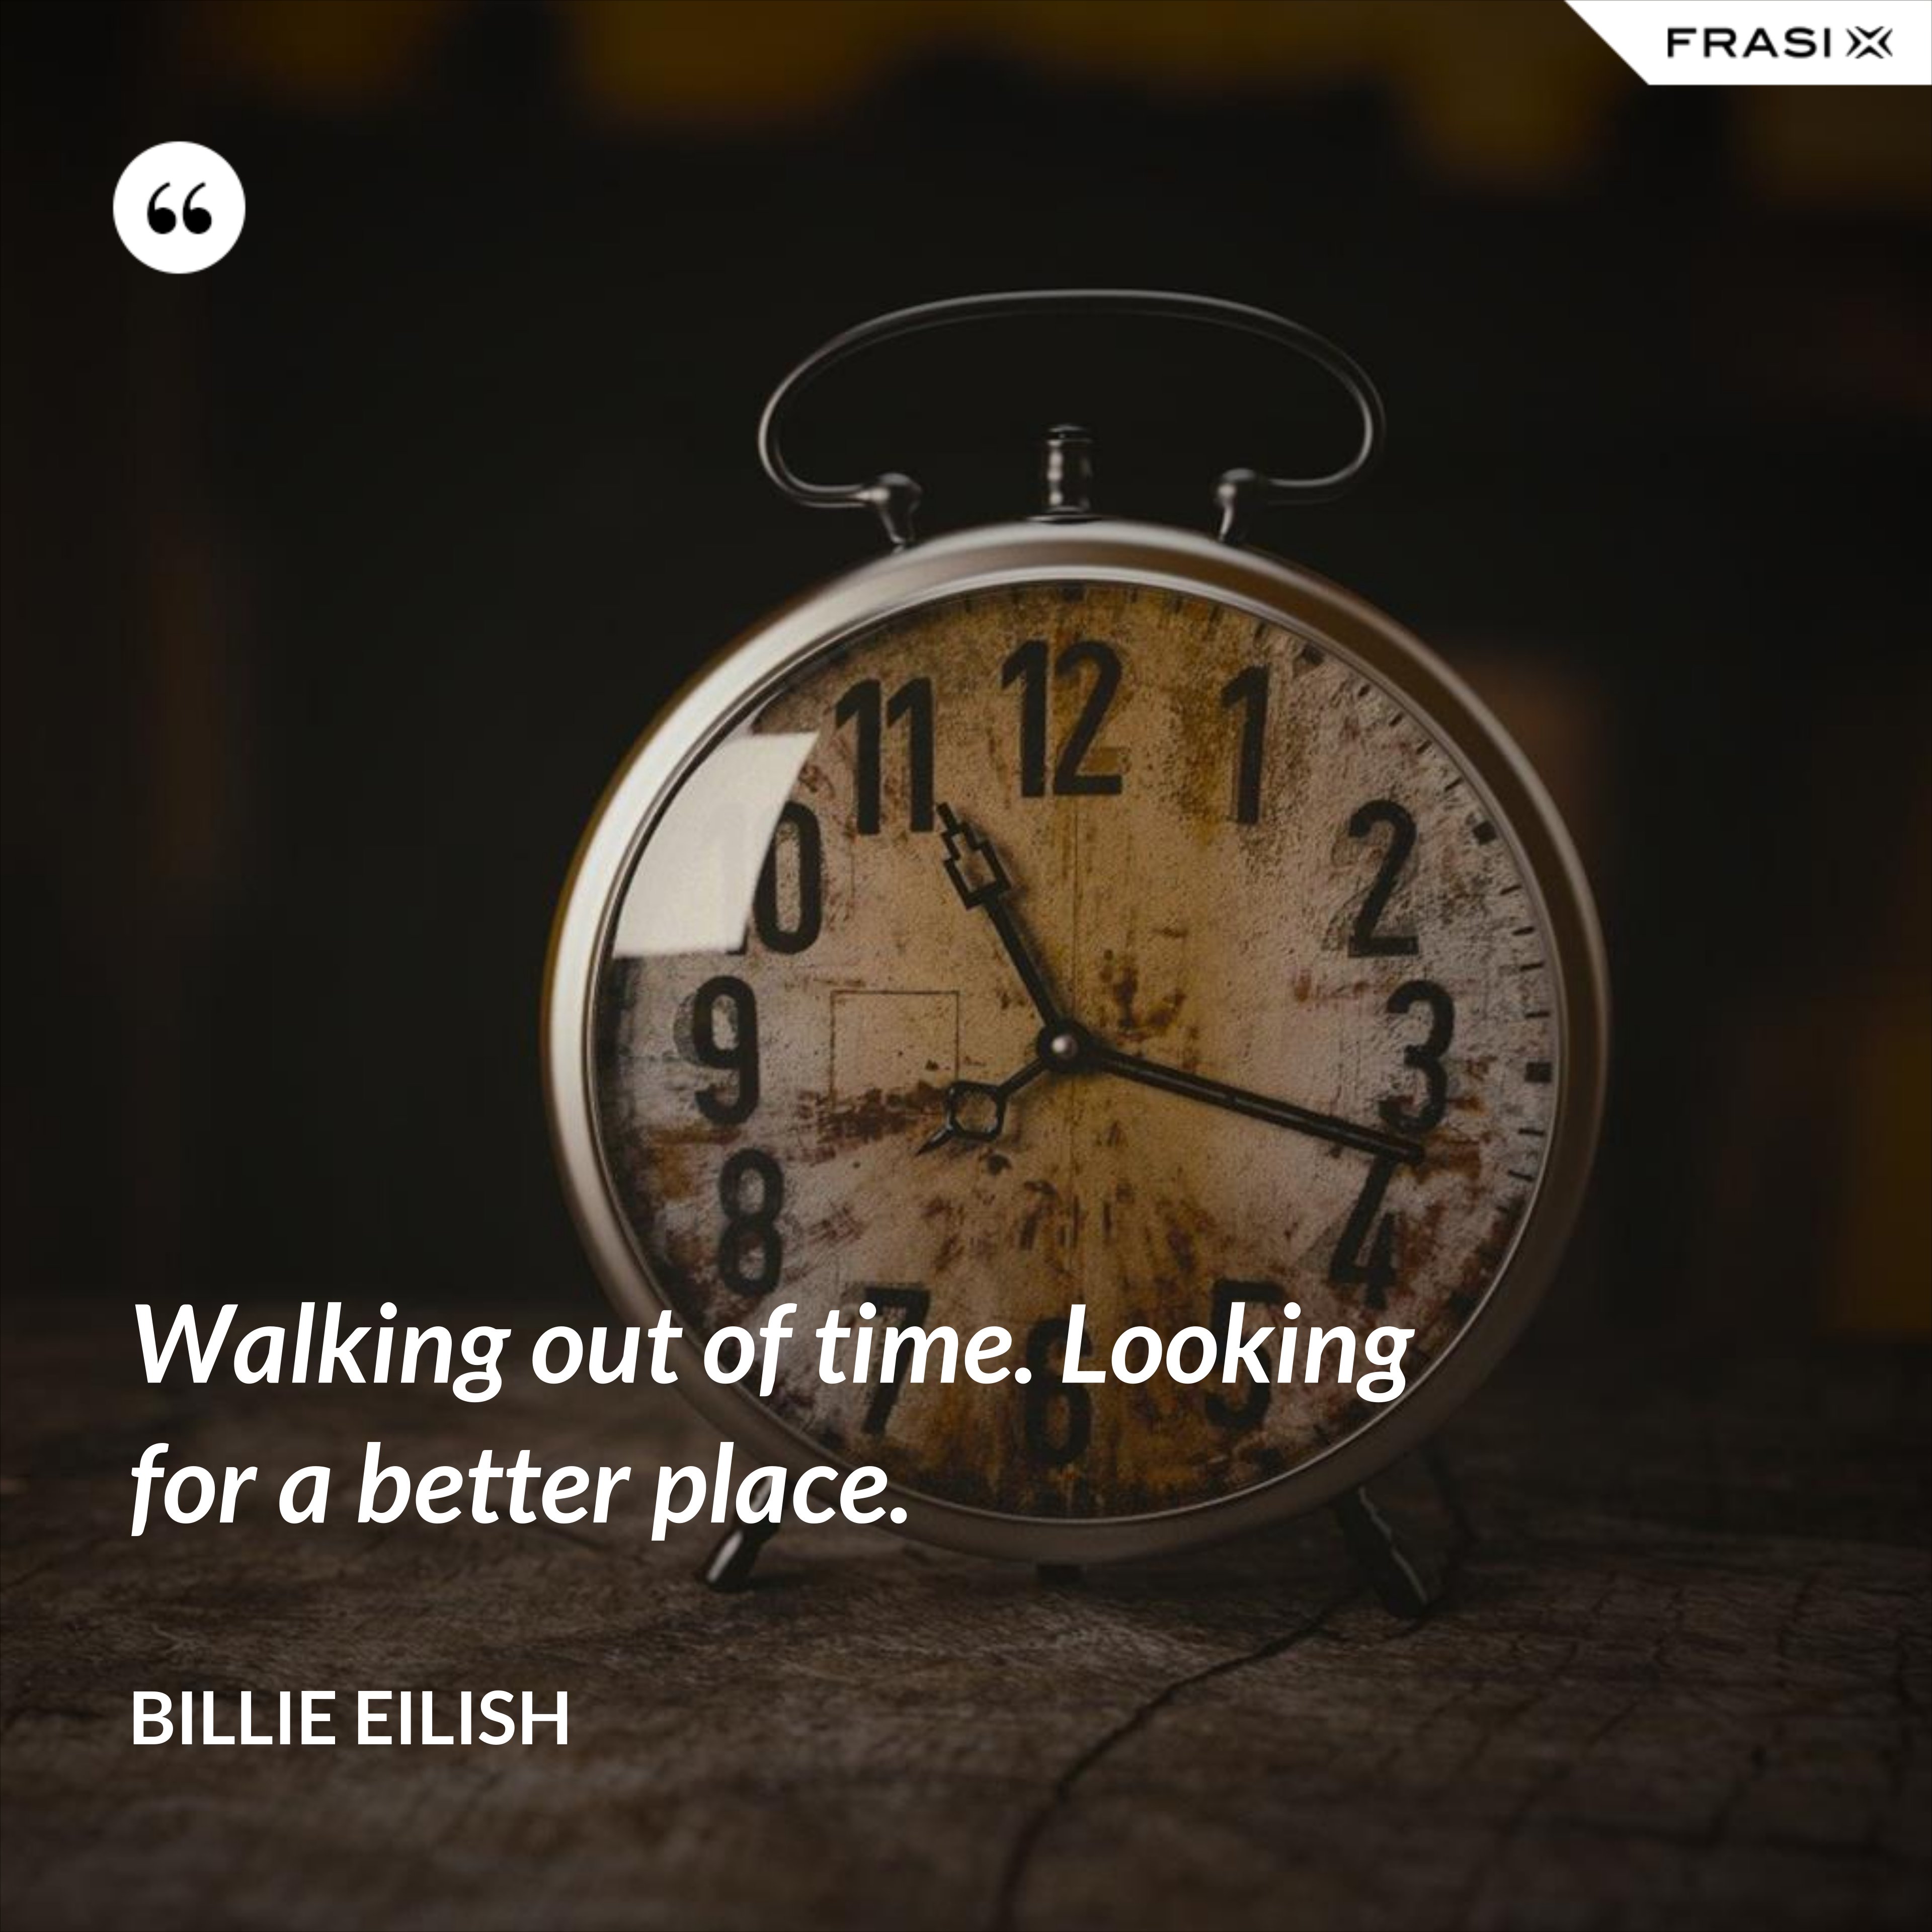 Walking out of time. Looking for a better place. - Billie Eilish